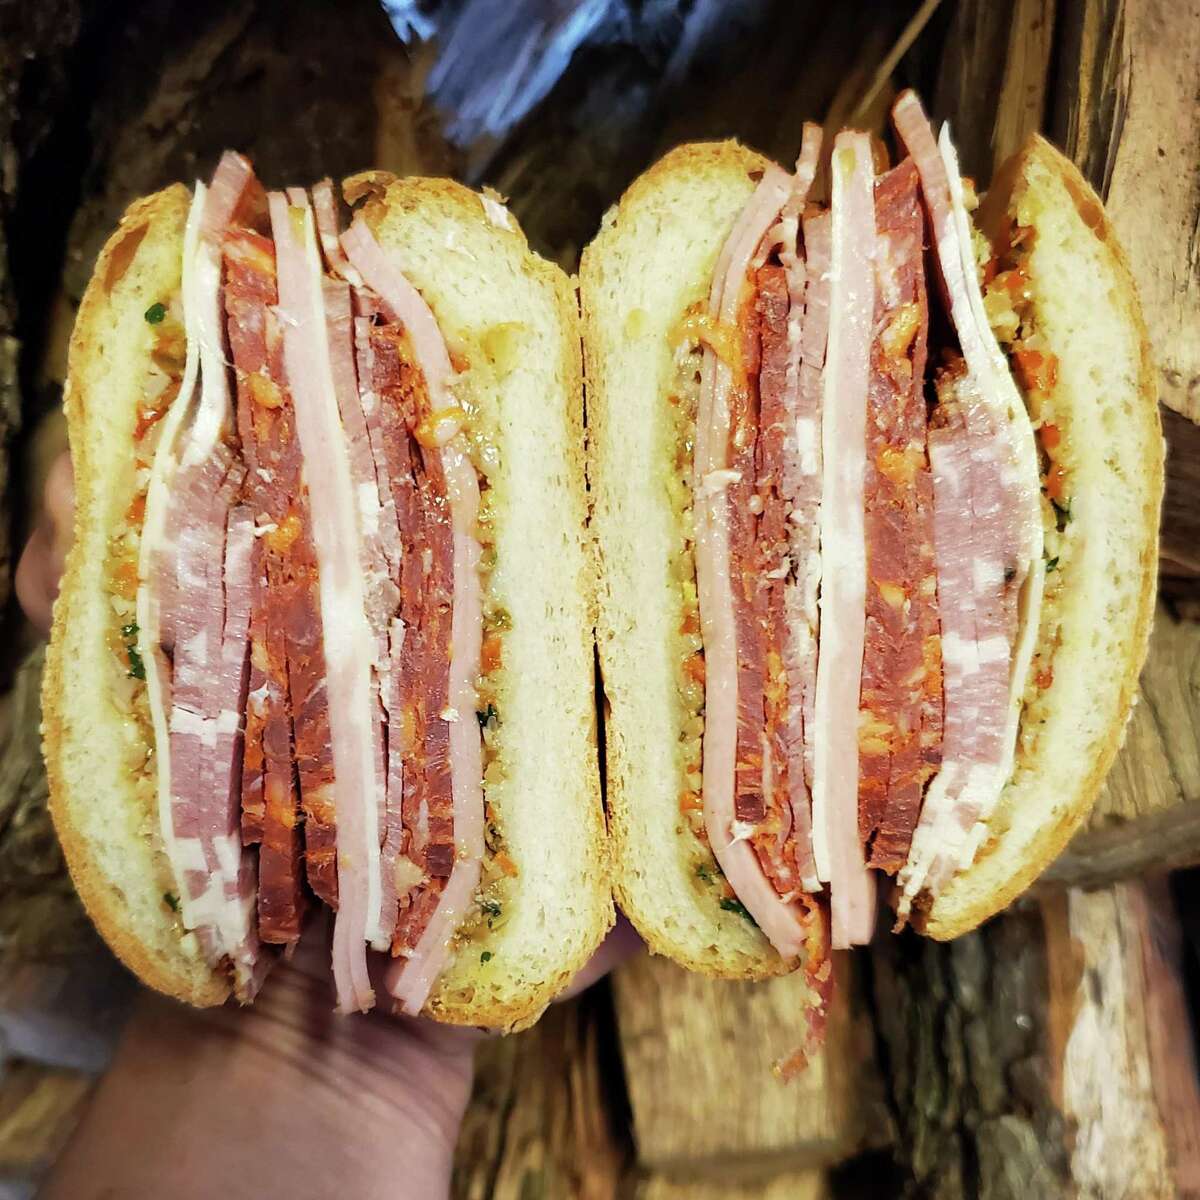 Blood Bros. BBQ has created a new muffuletta sandwich made with house-made smoked capicola, mortadella, soppressata, provolone and olive spread. It will come on the menu as an occasional special.